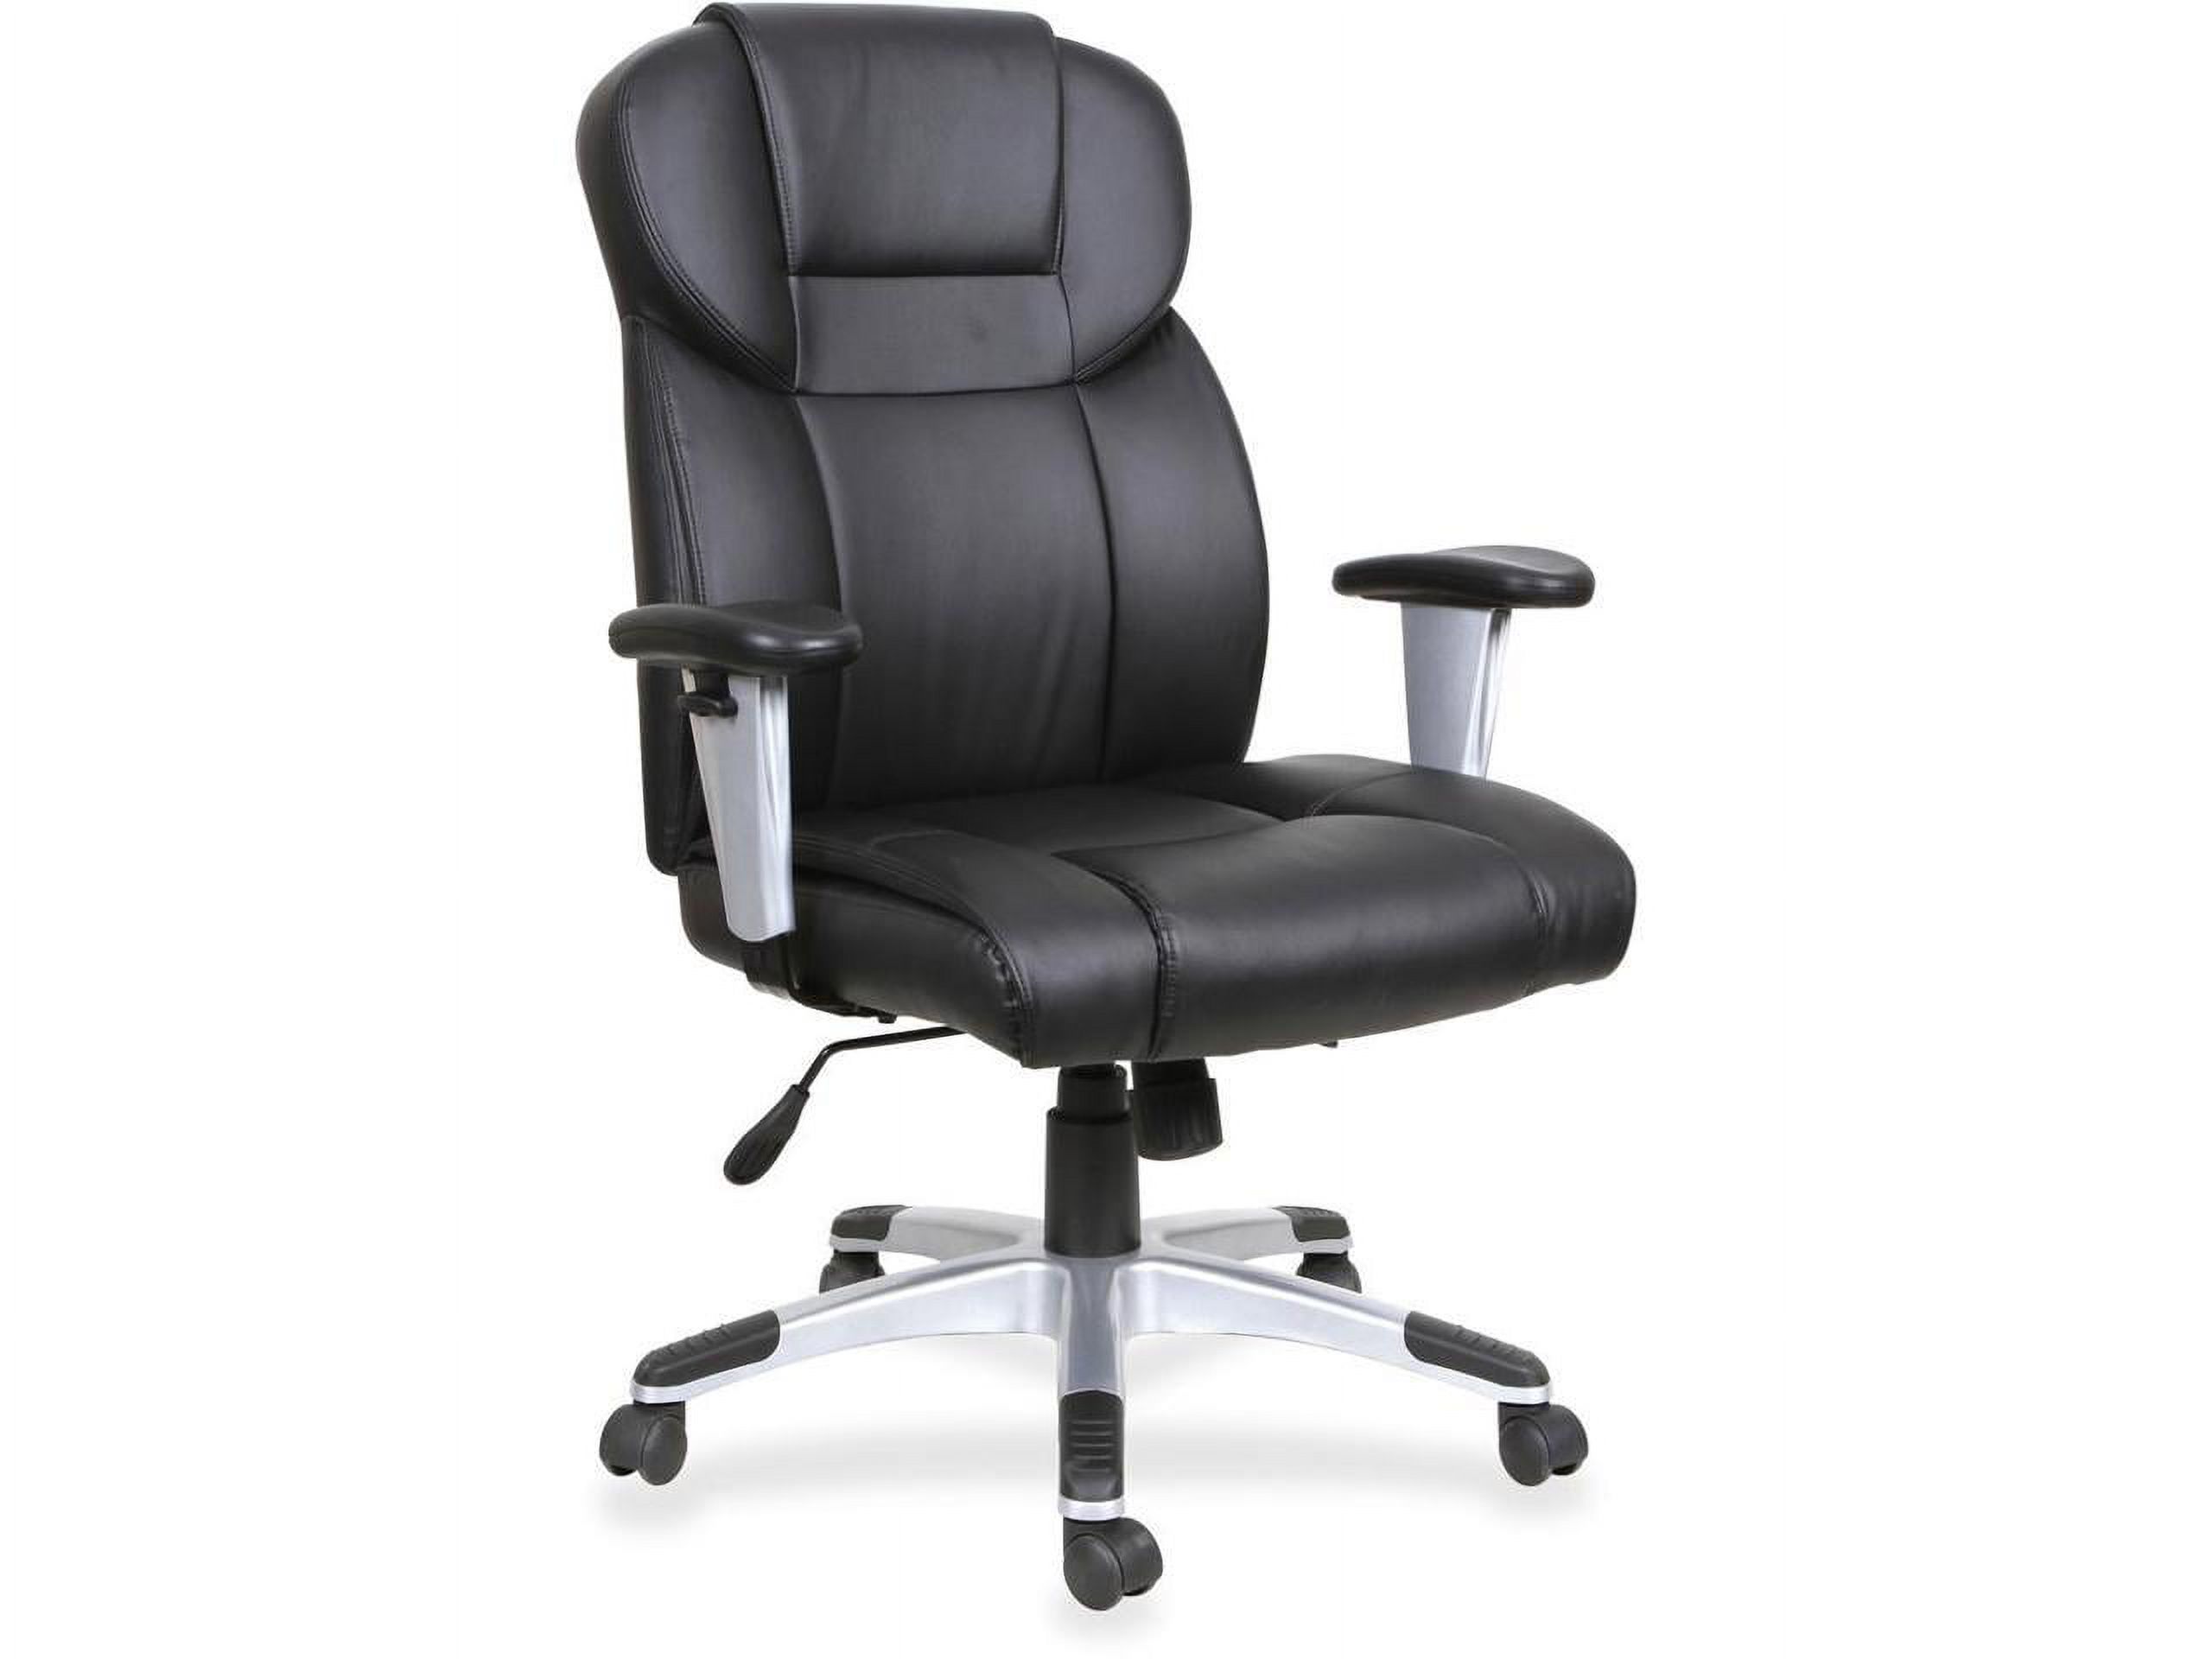 Lorell High-back Leather Executive Chair - Bonded Leather Seat - Bonded Leather Back - Black - 28.9" Width x 28.5" Depth - image 5 of 9